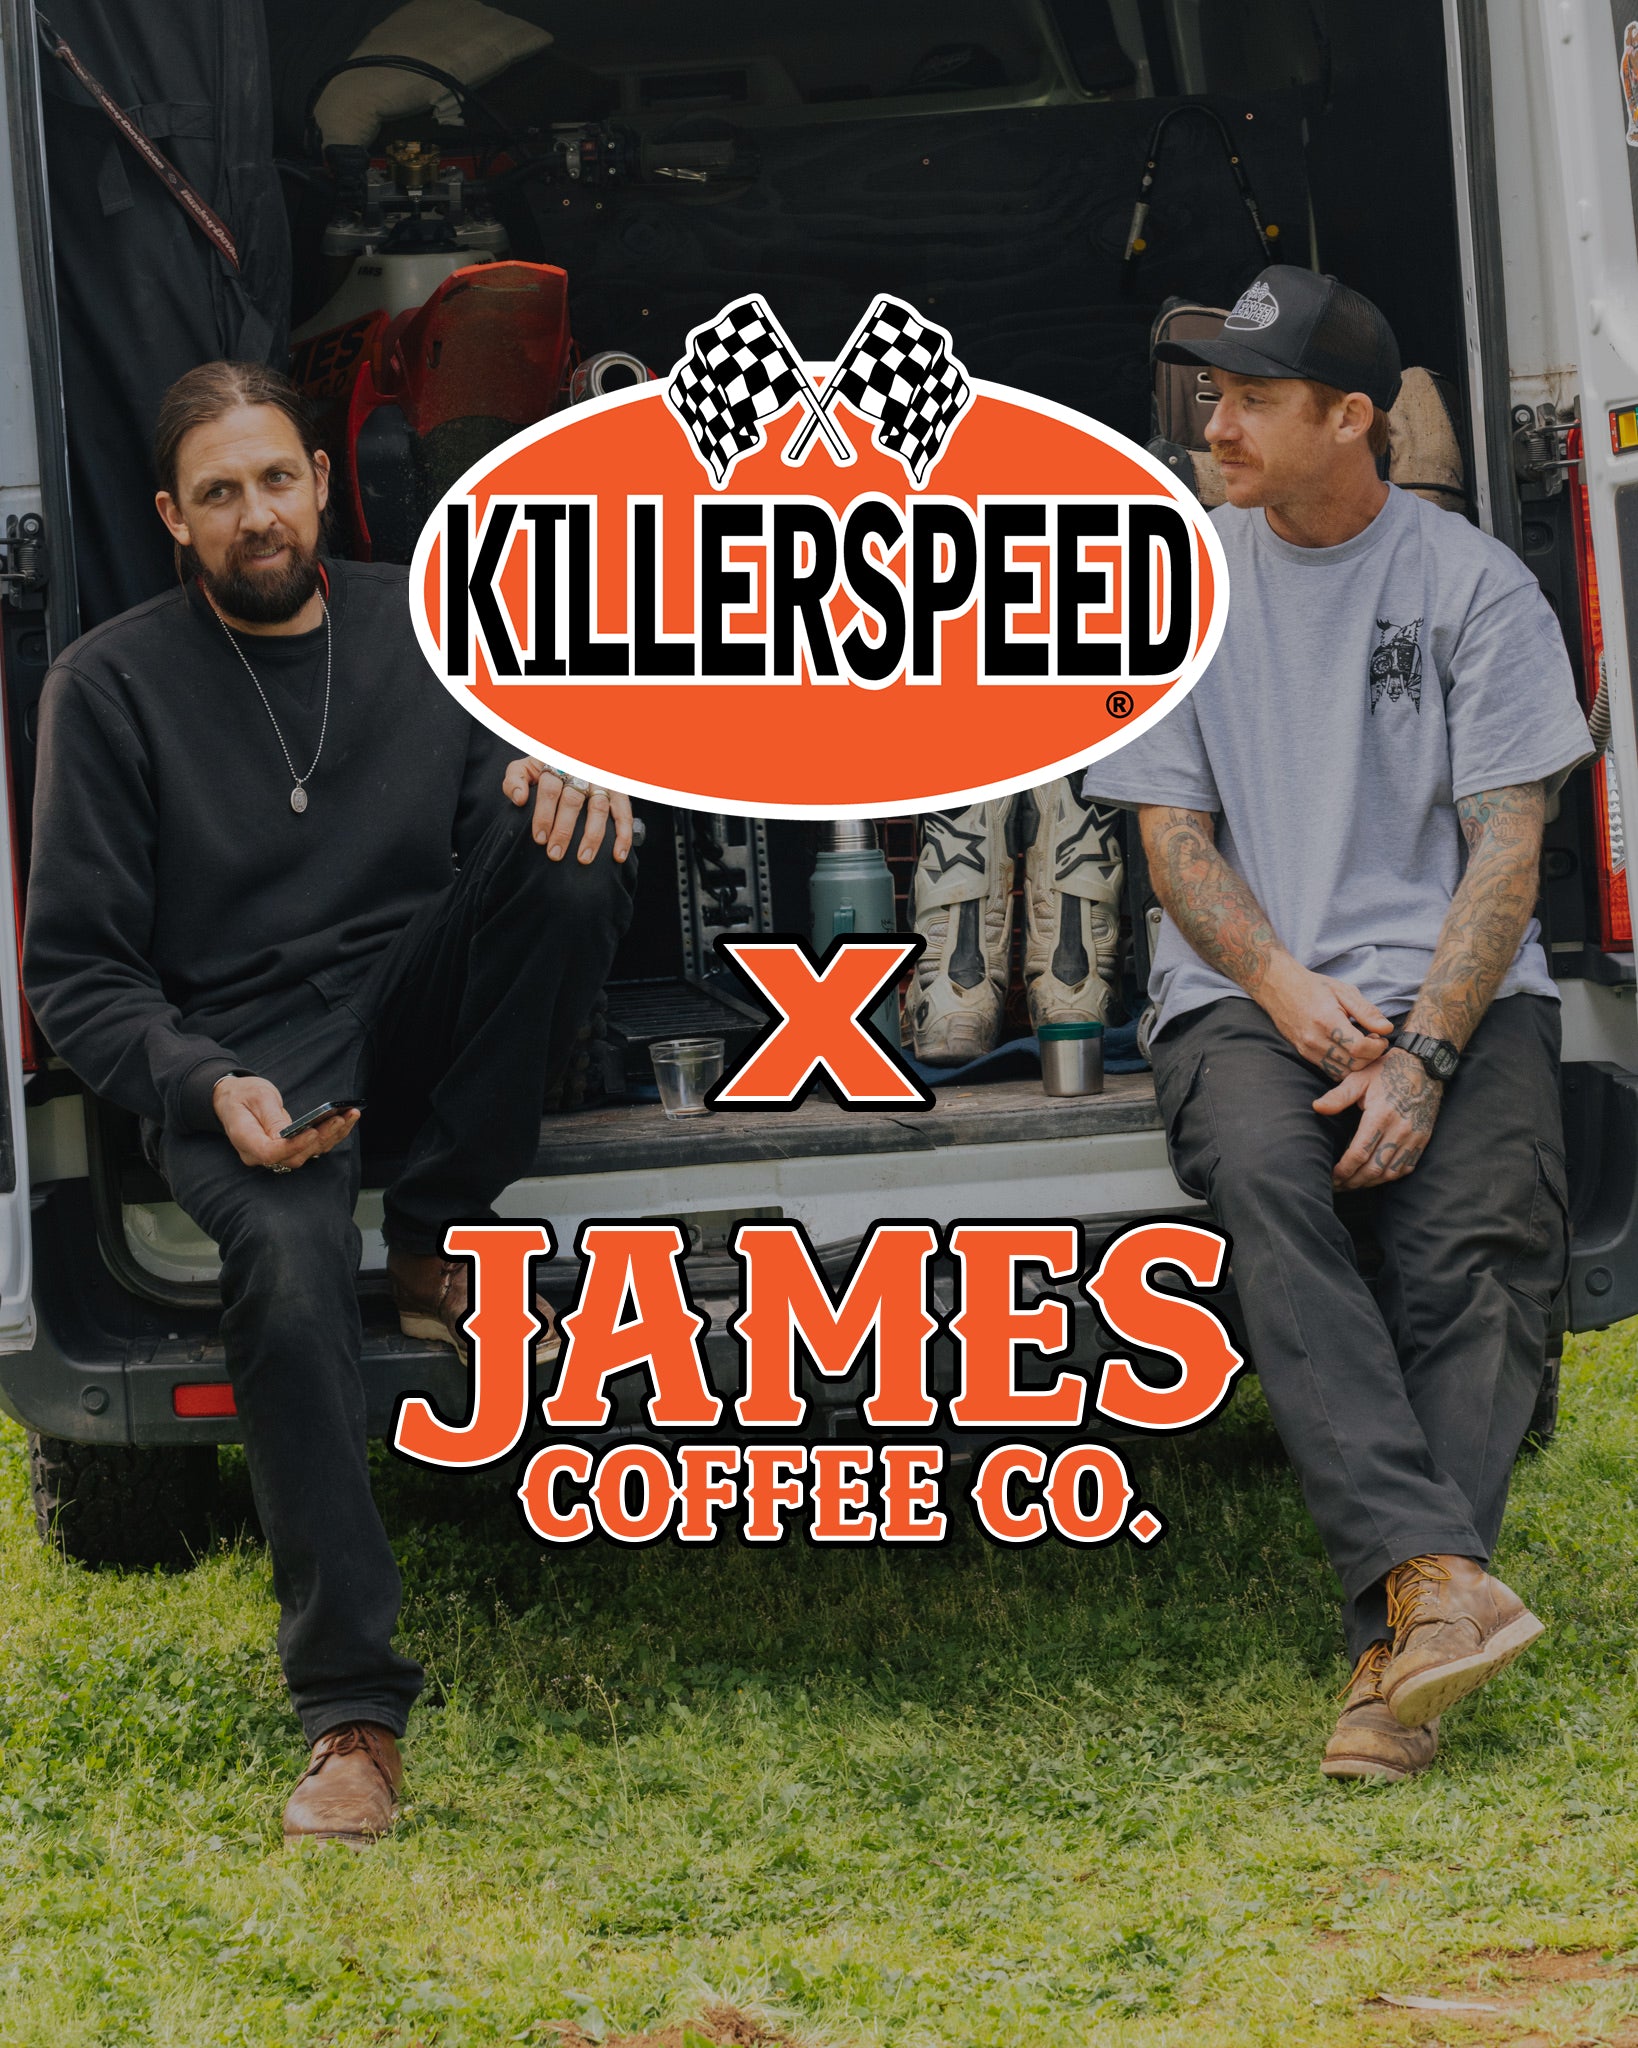 David Interviews Mikey Fermoile of Killerspeed and Any Prints Co.